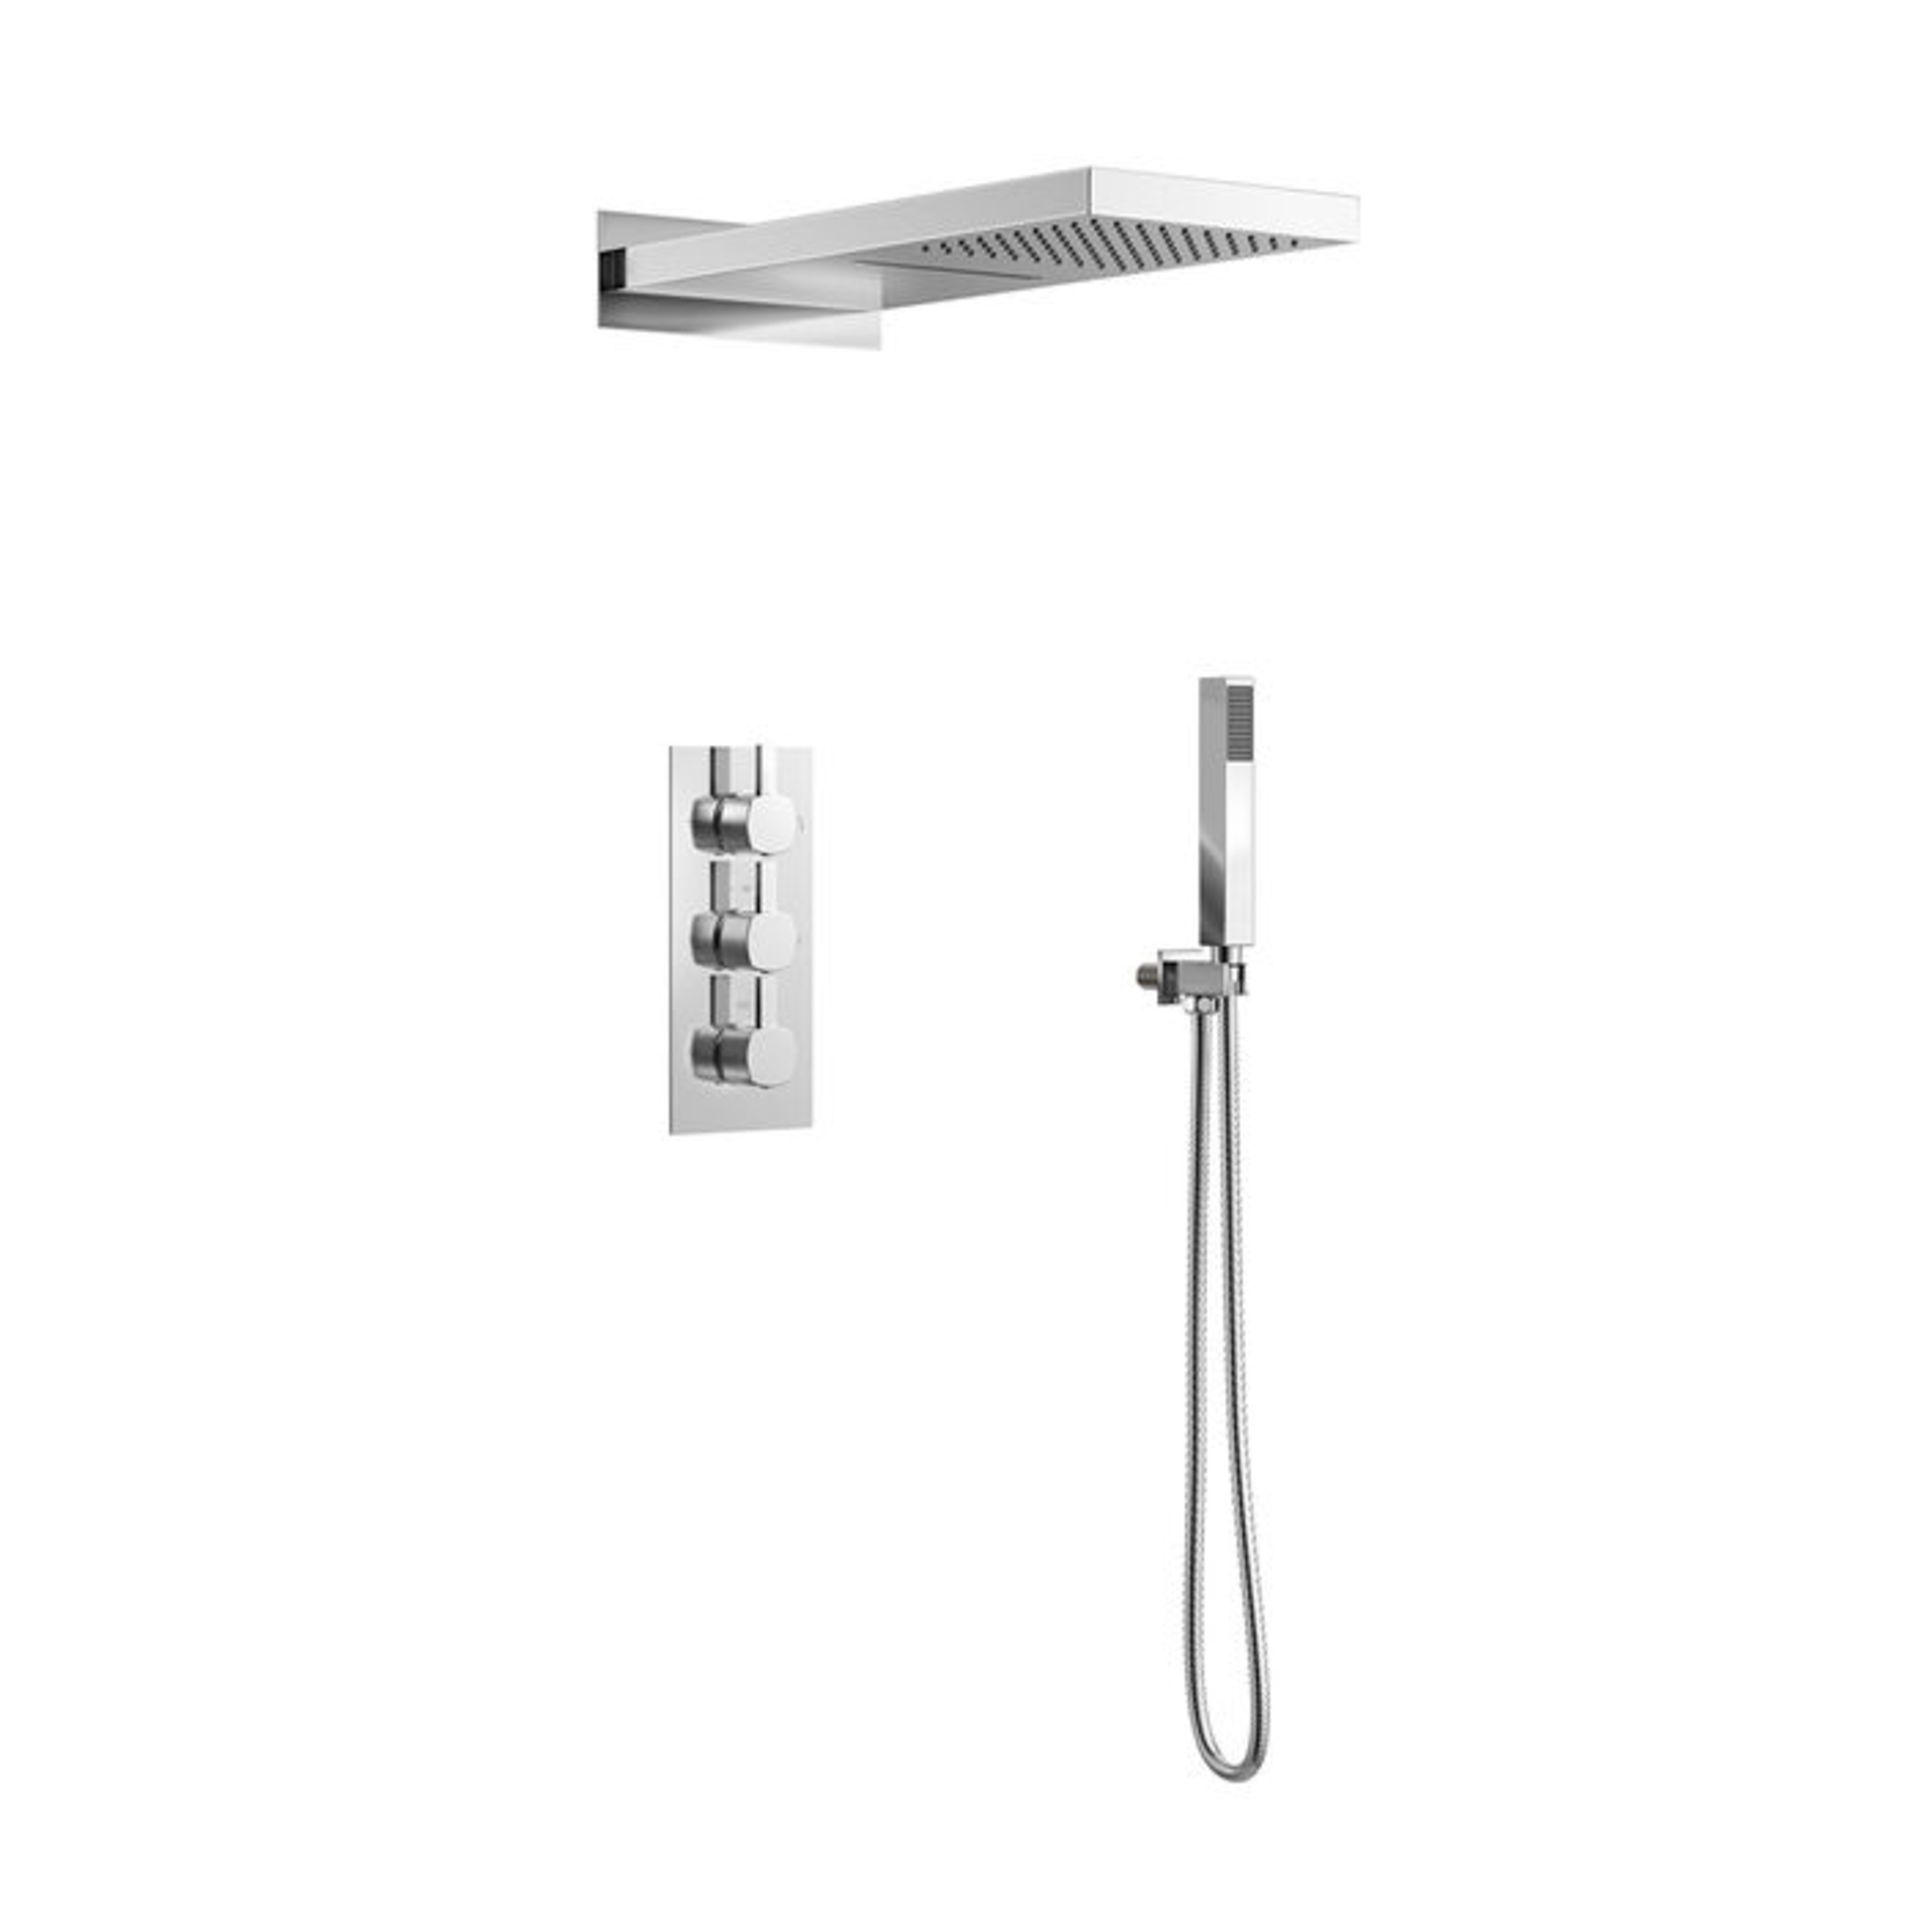 (G3) Rectangular Concealed Thermostatic Mixer Rainfall Shower Kit. RRP £699.99. Opt for either... - Image 5 of 5